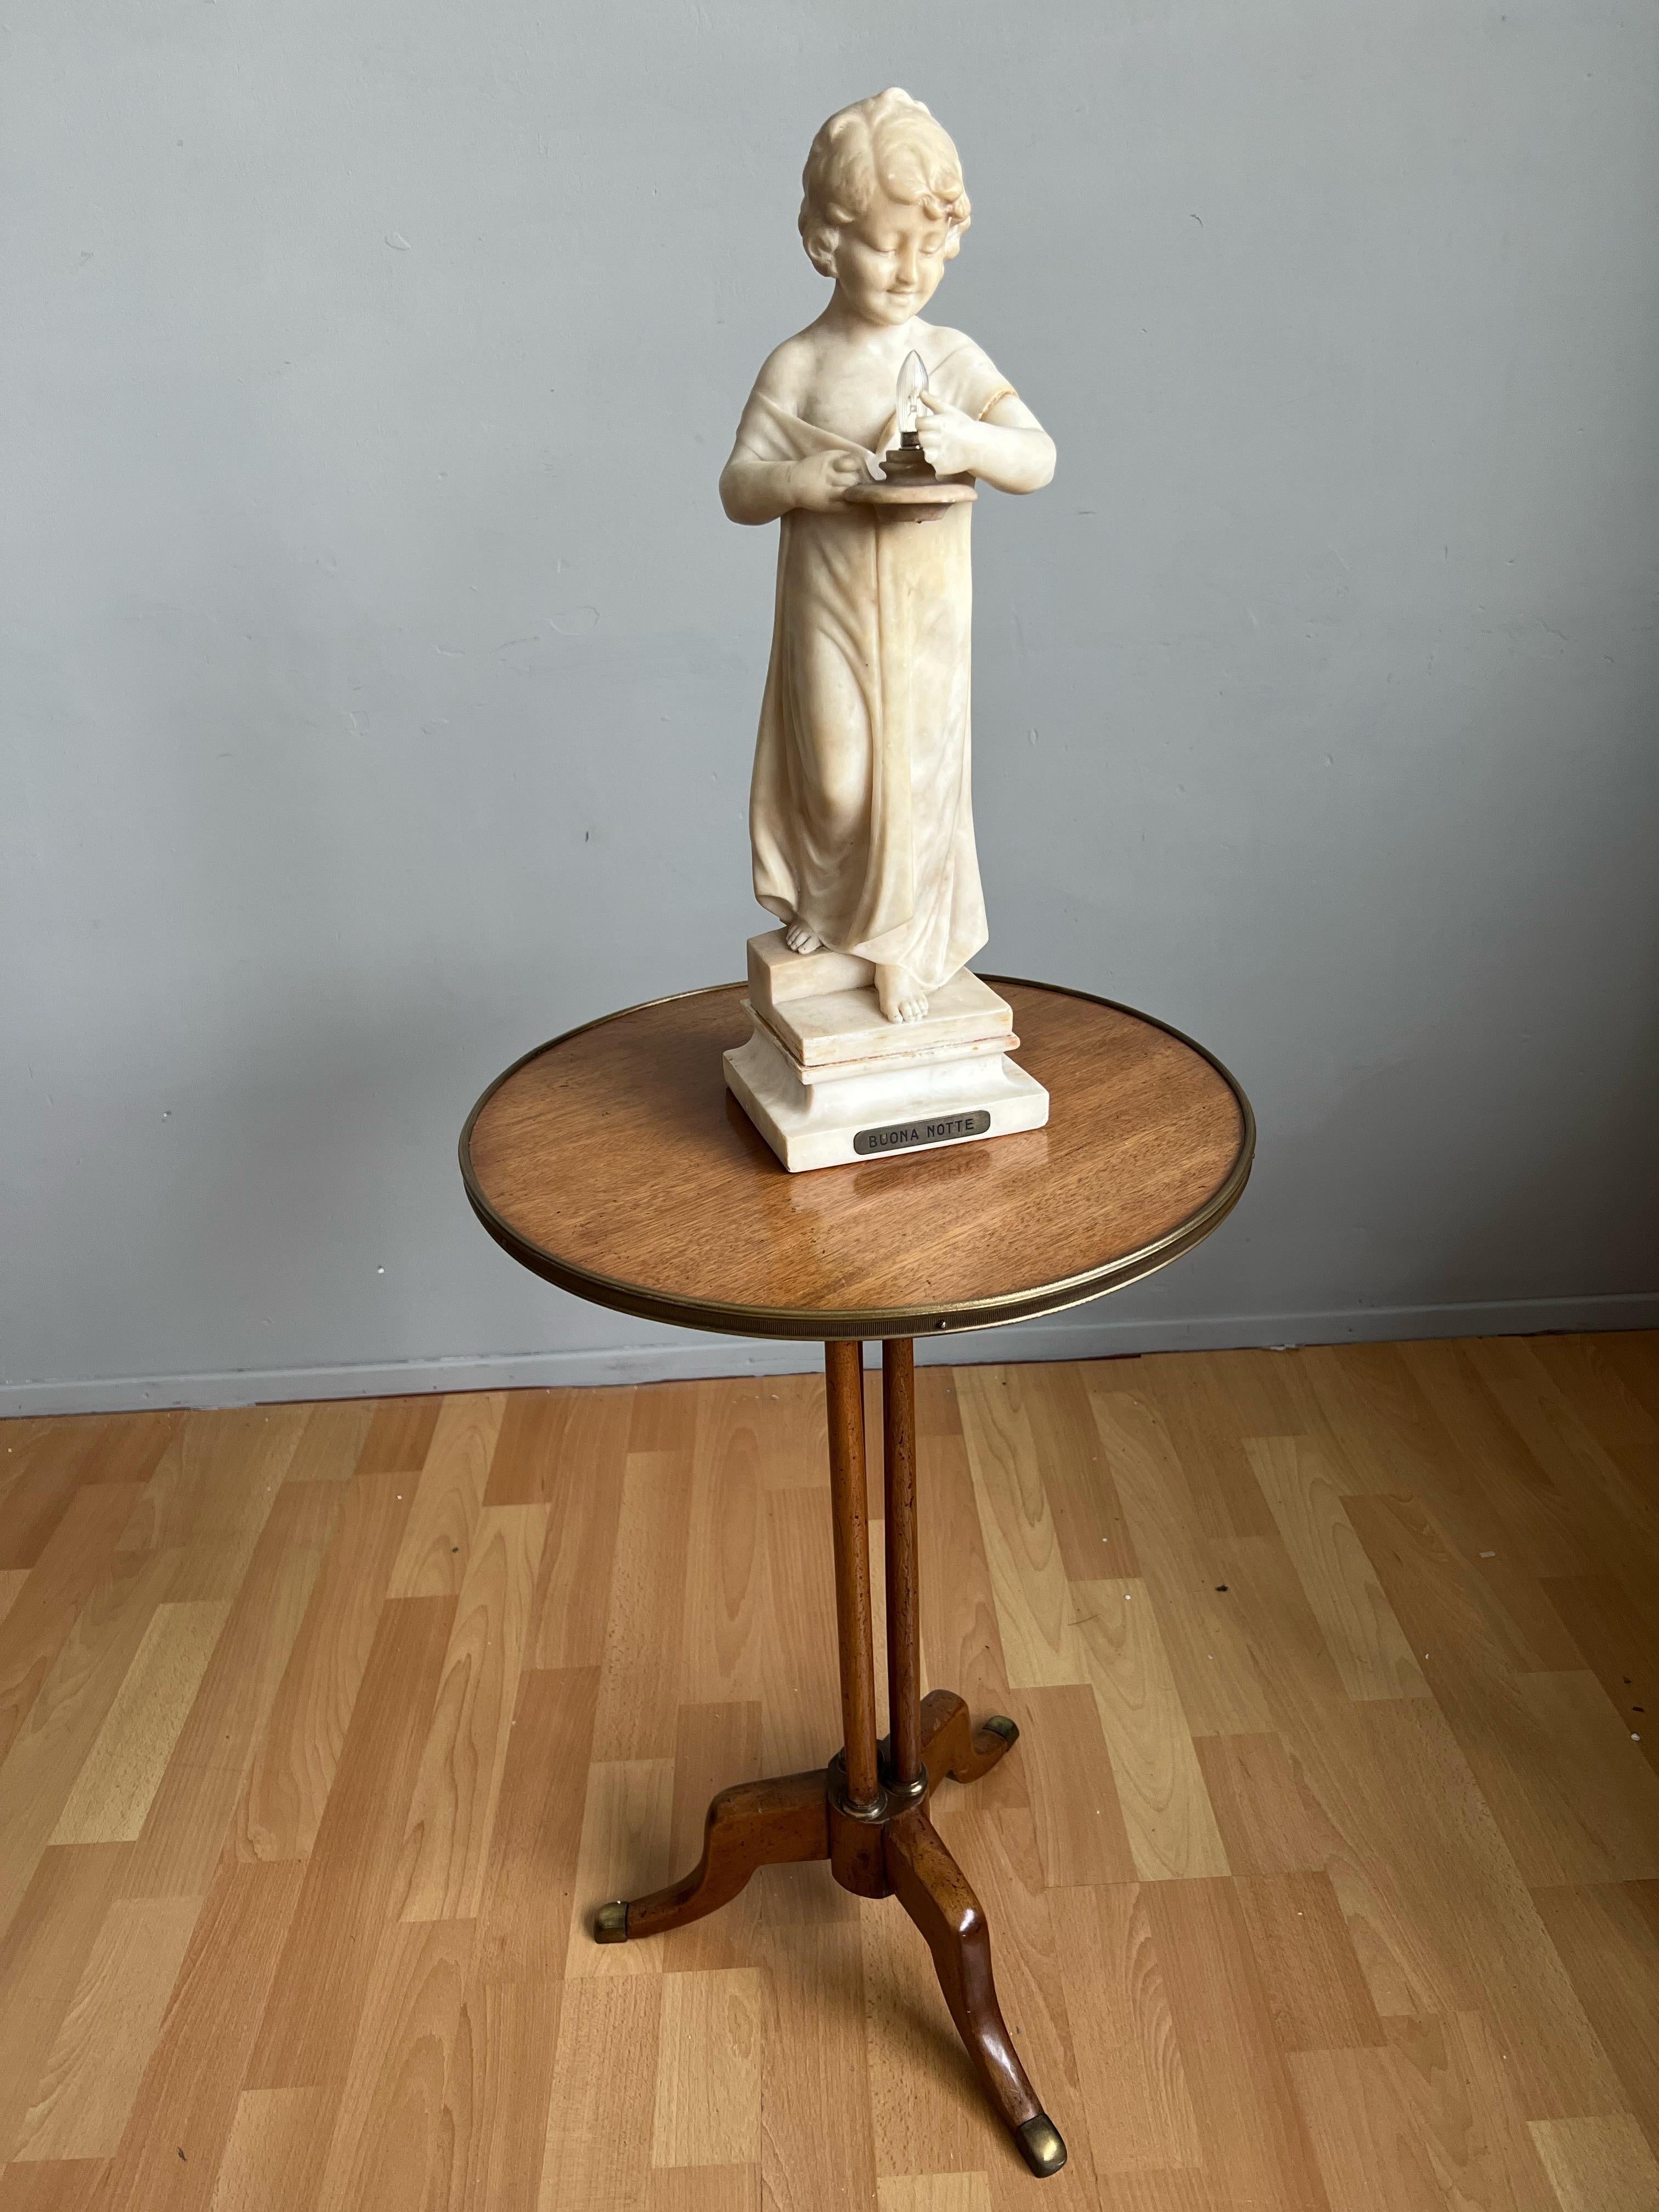 Enchanting antique sculpture of a girl on the stairs holding a light, by Umberto Stiaccini, Florence circa 1910.

This beautiful and truly elegant, sculptural table or desk lamp is another one of our recent great finds. On the front is a brass